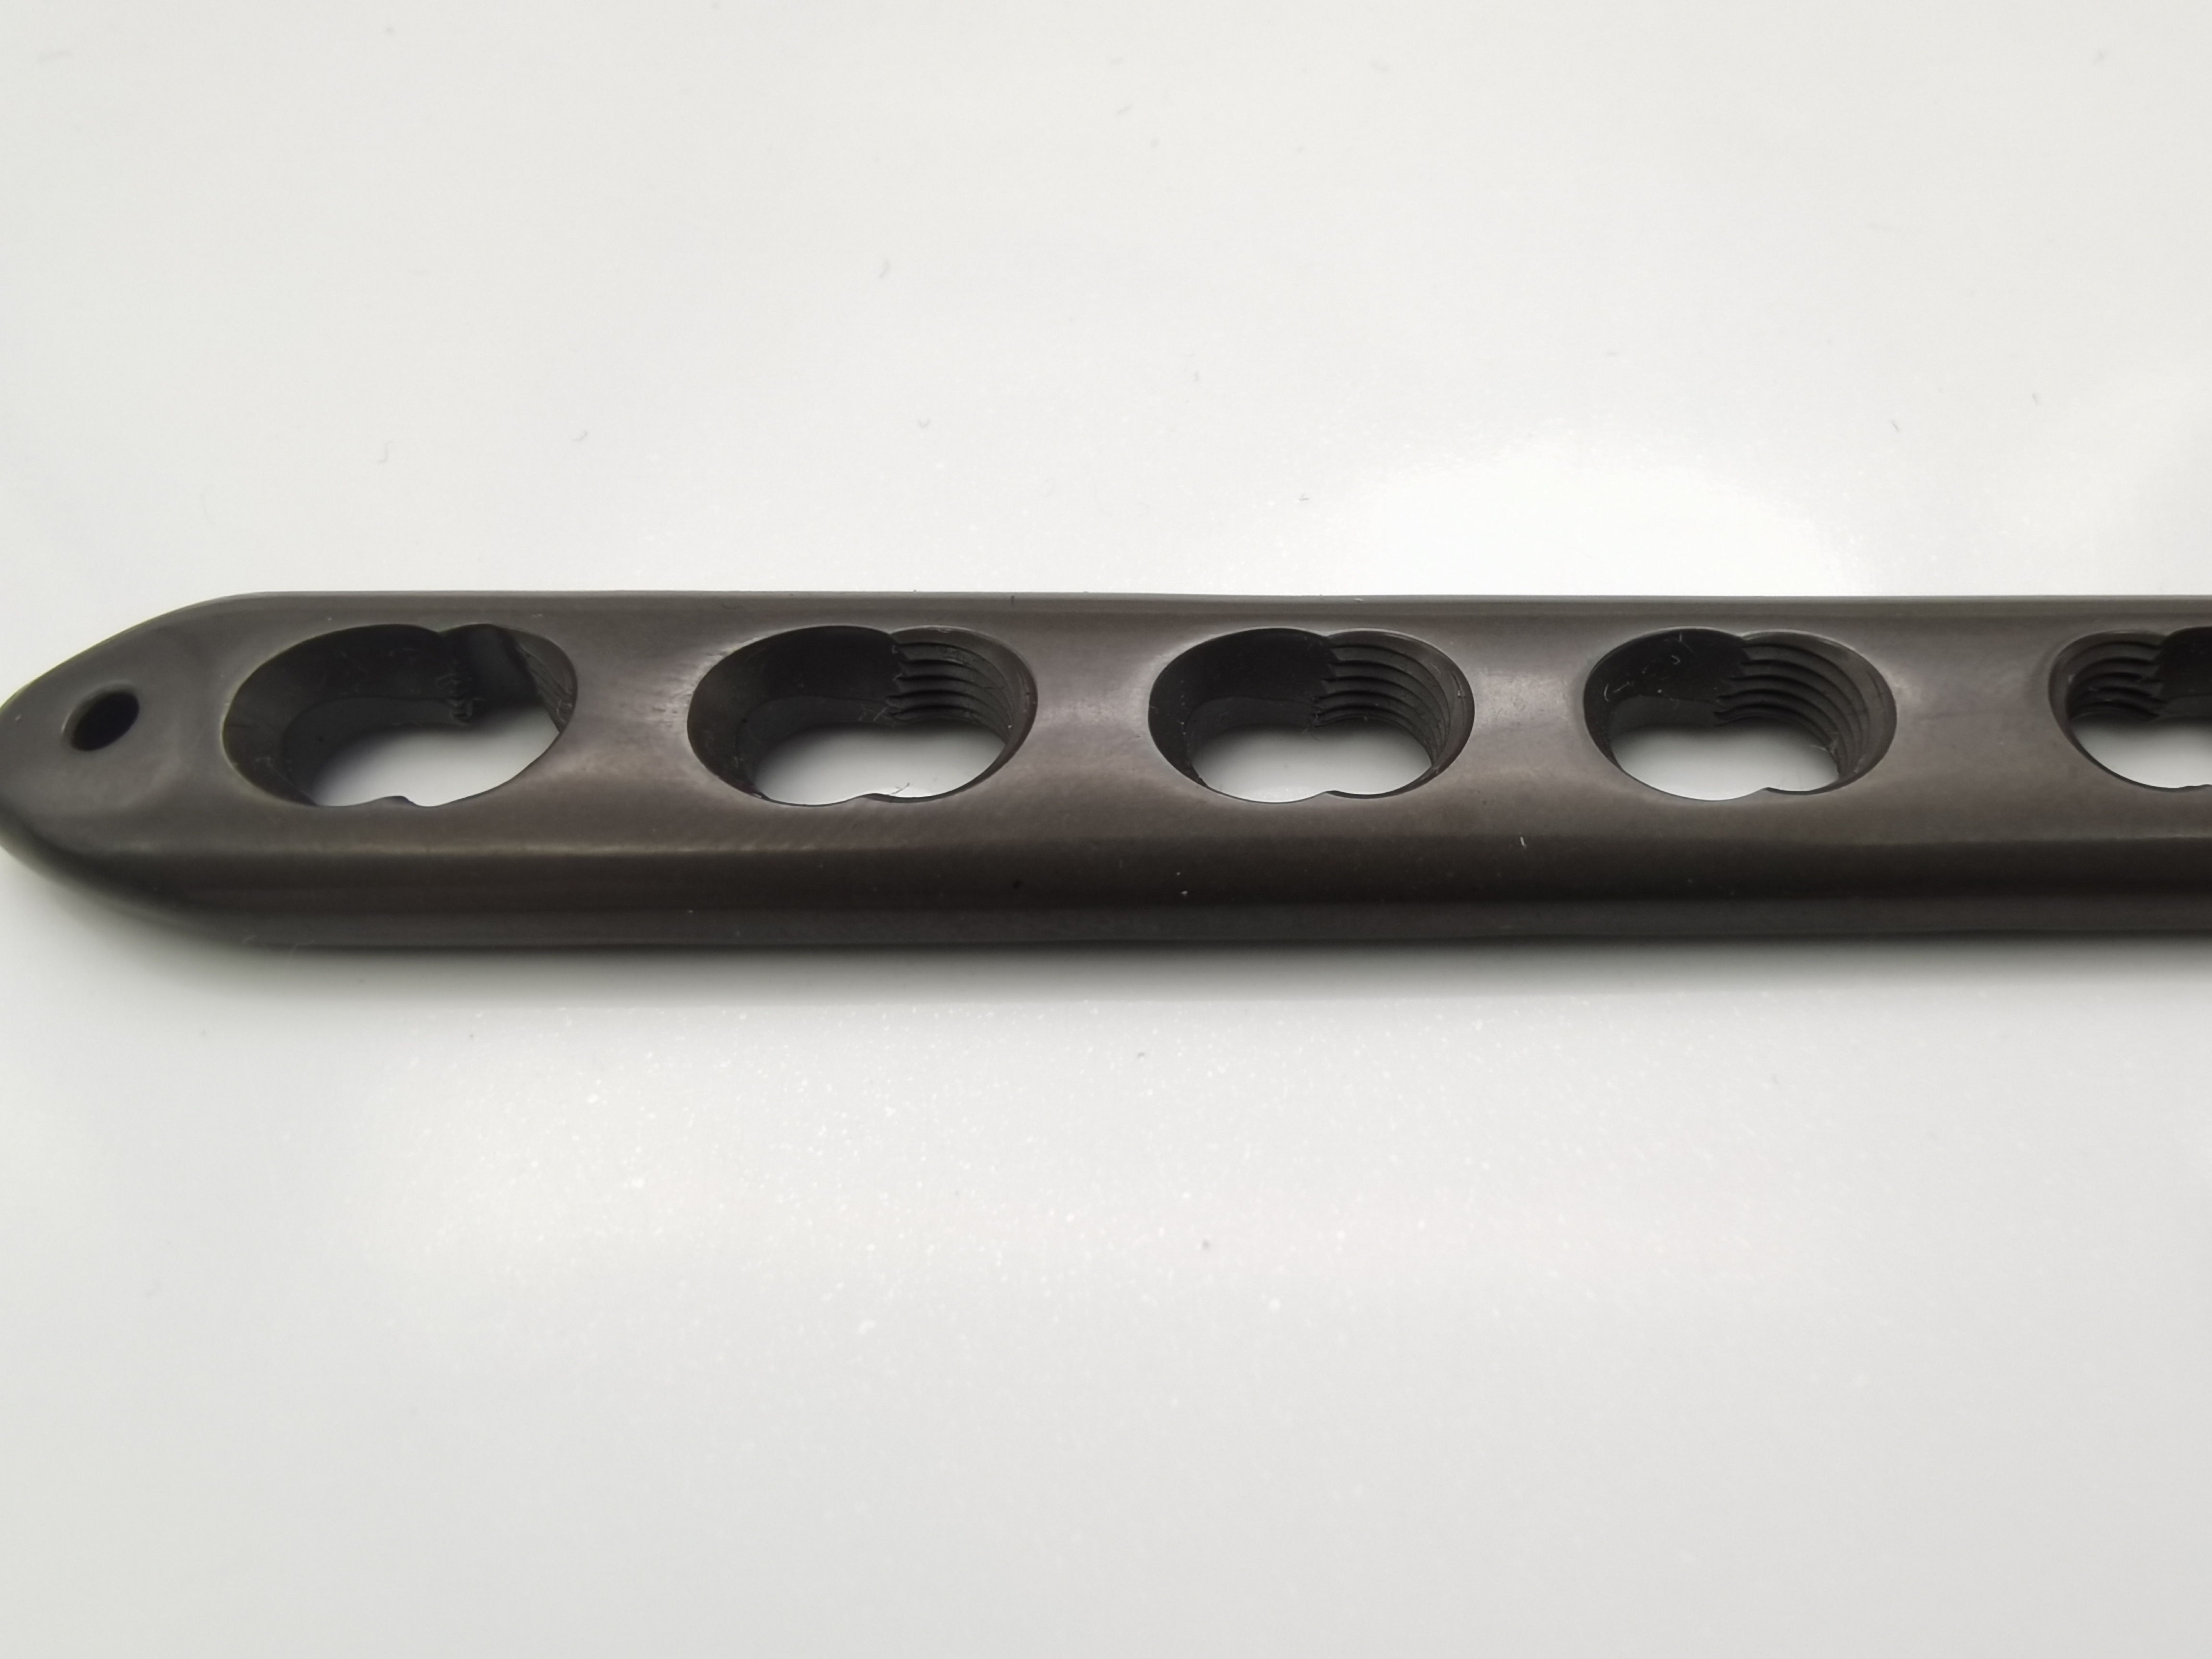 Orthopedic implants Interventional materials Multi-axial tibial Locking Plate for tibial of pure titanium